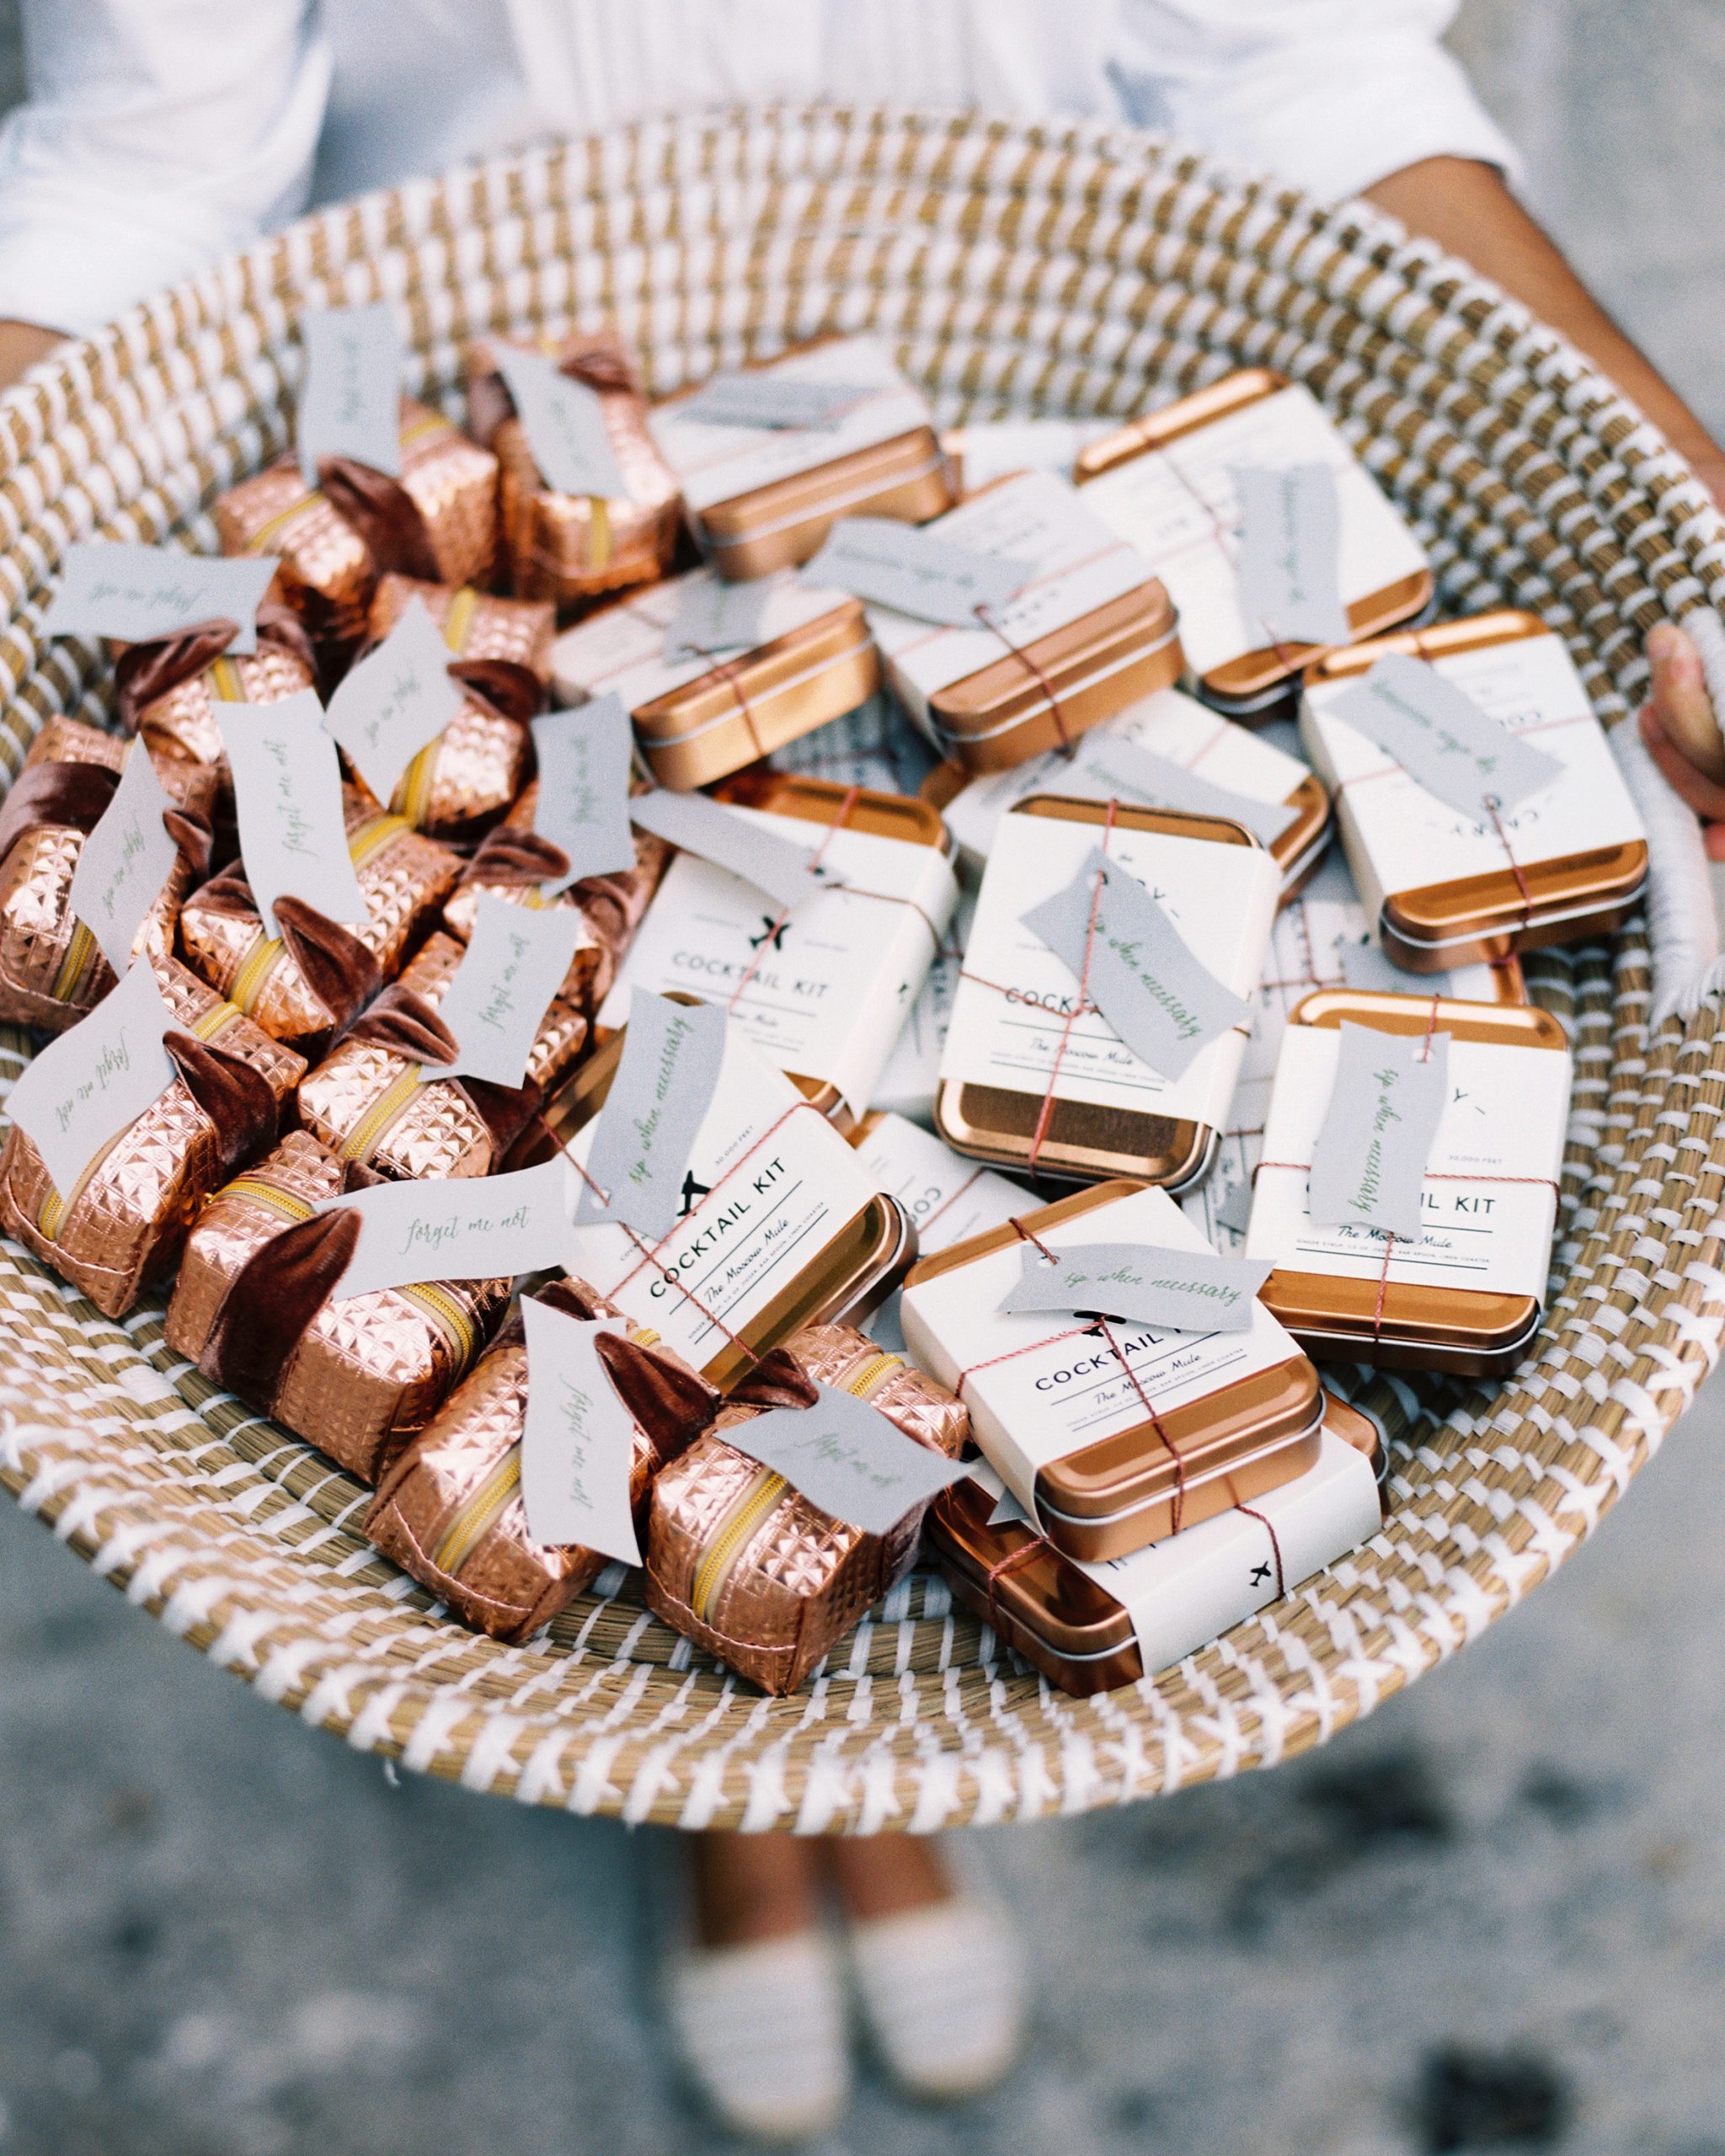 50 Creative Wedding Favors That Will Delight Your Guests ...